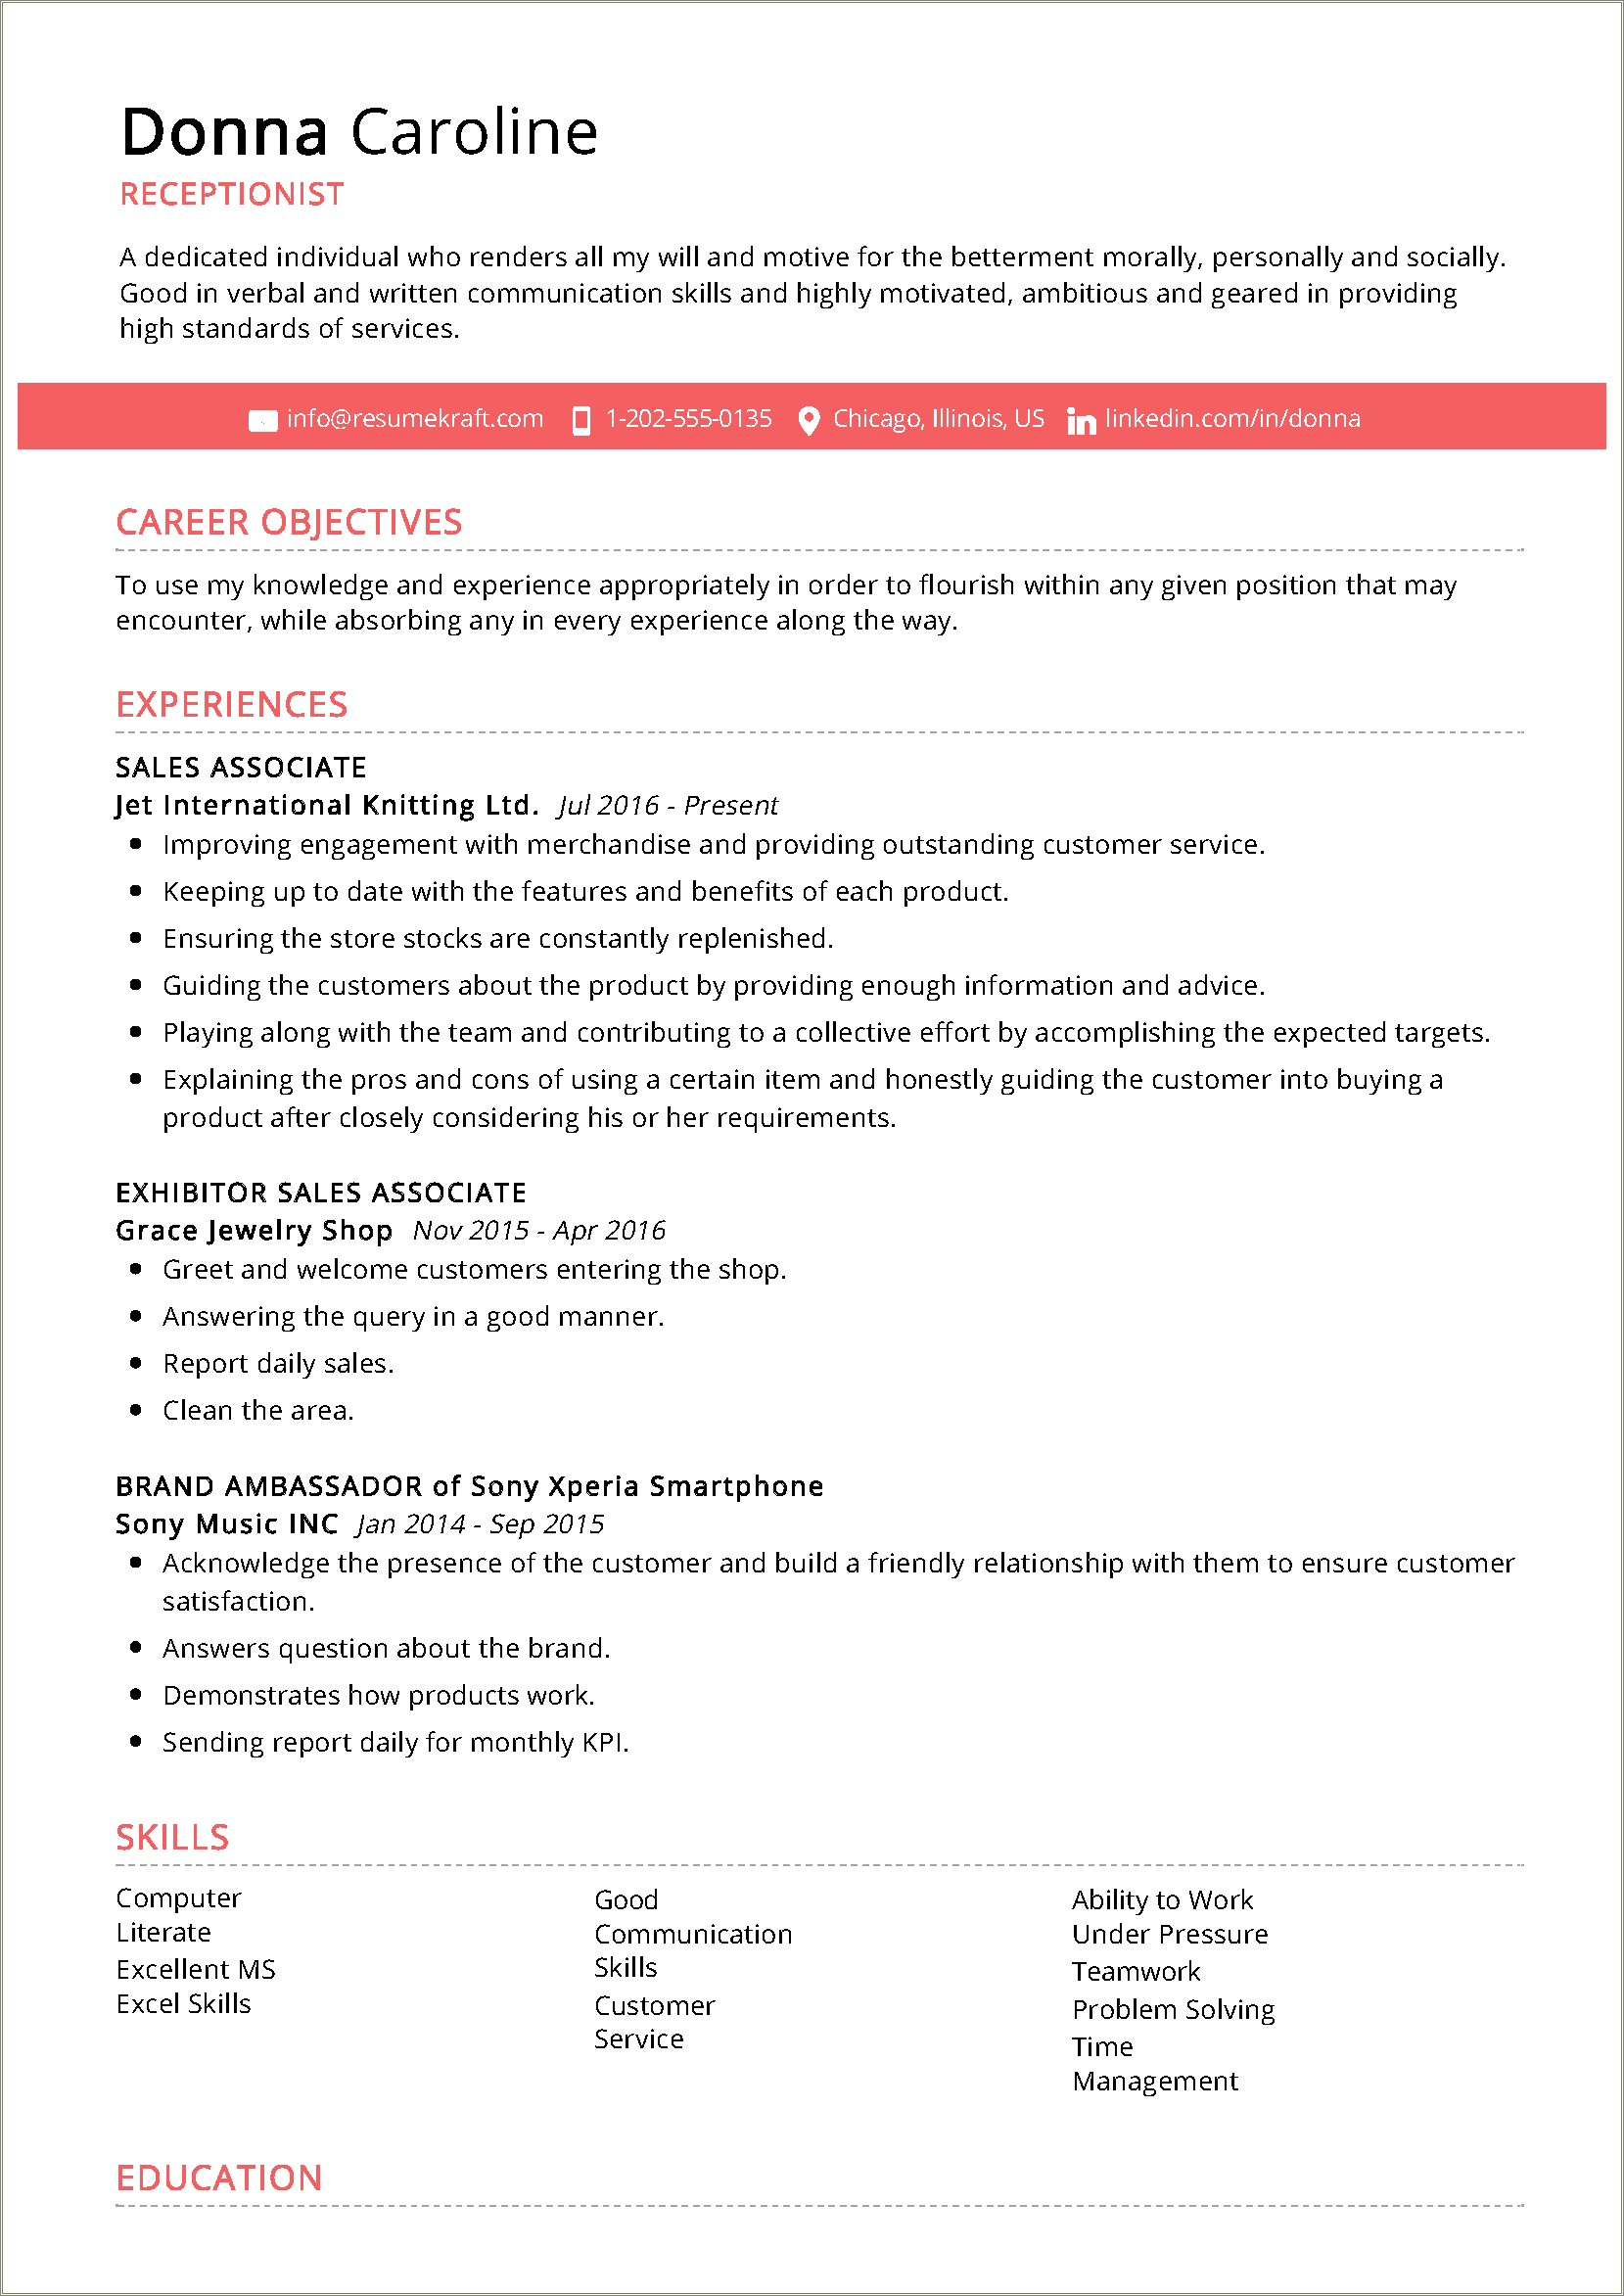 Sample Resume Objective Statements For Receptionist